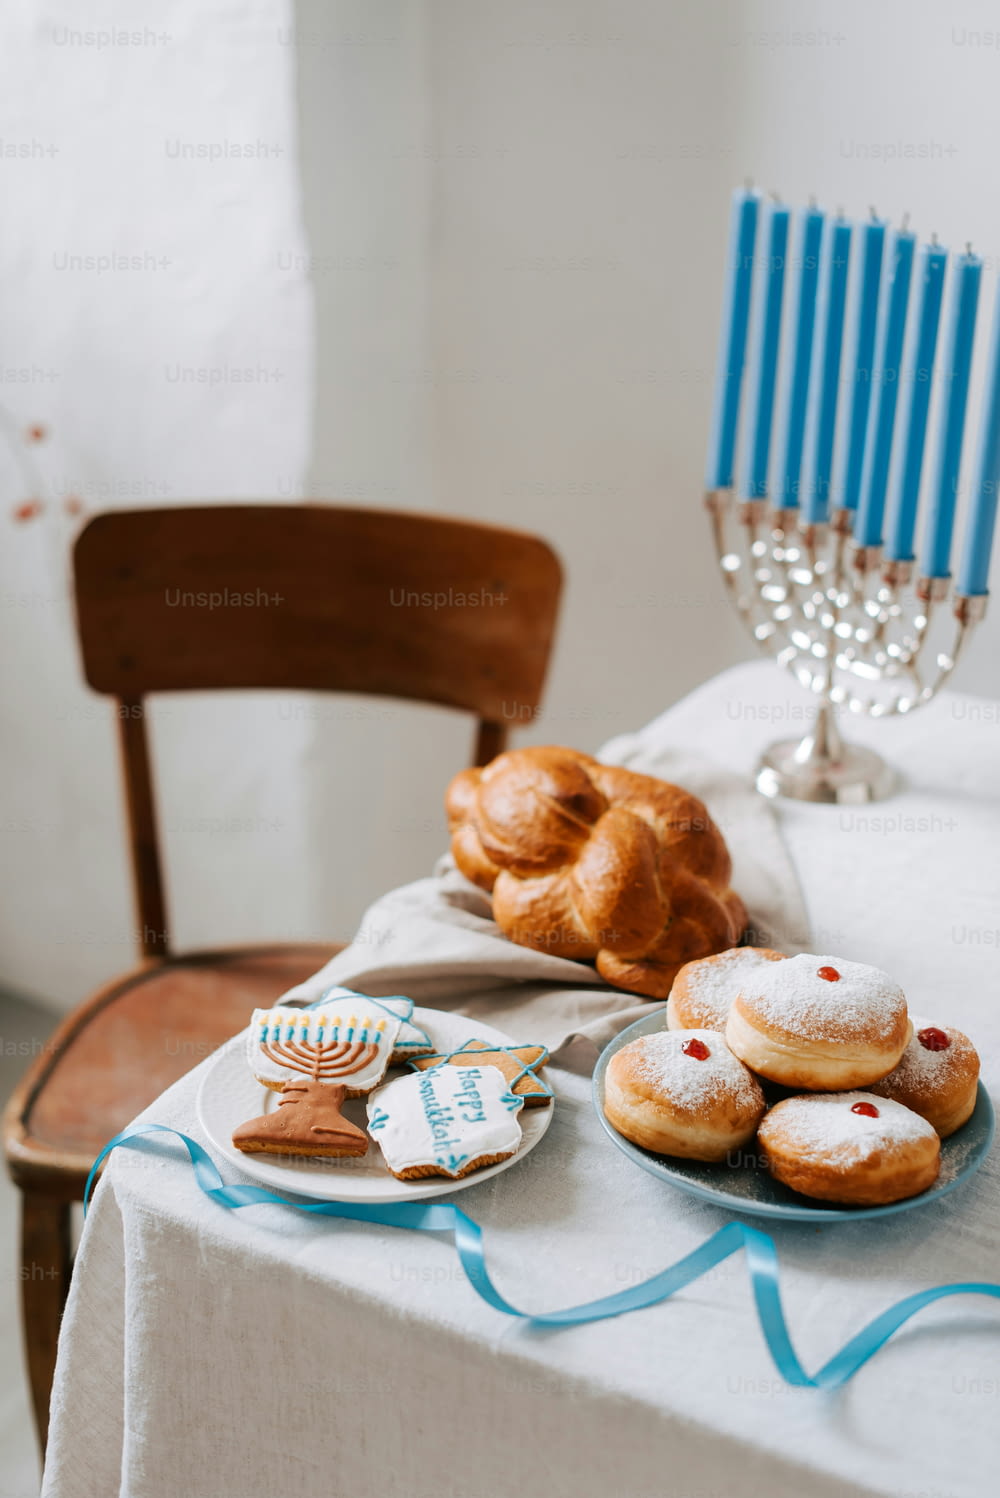 a table topped with pastries and a plate of donuts